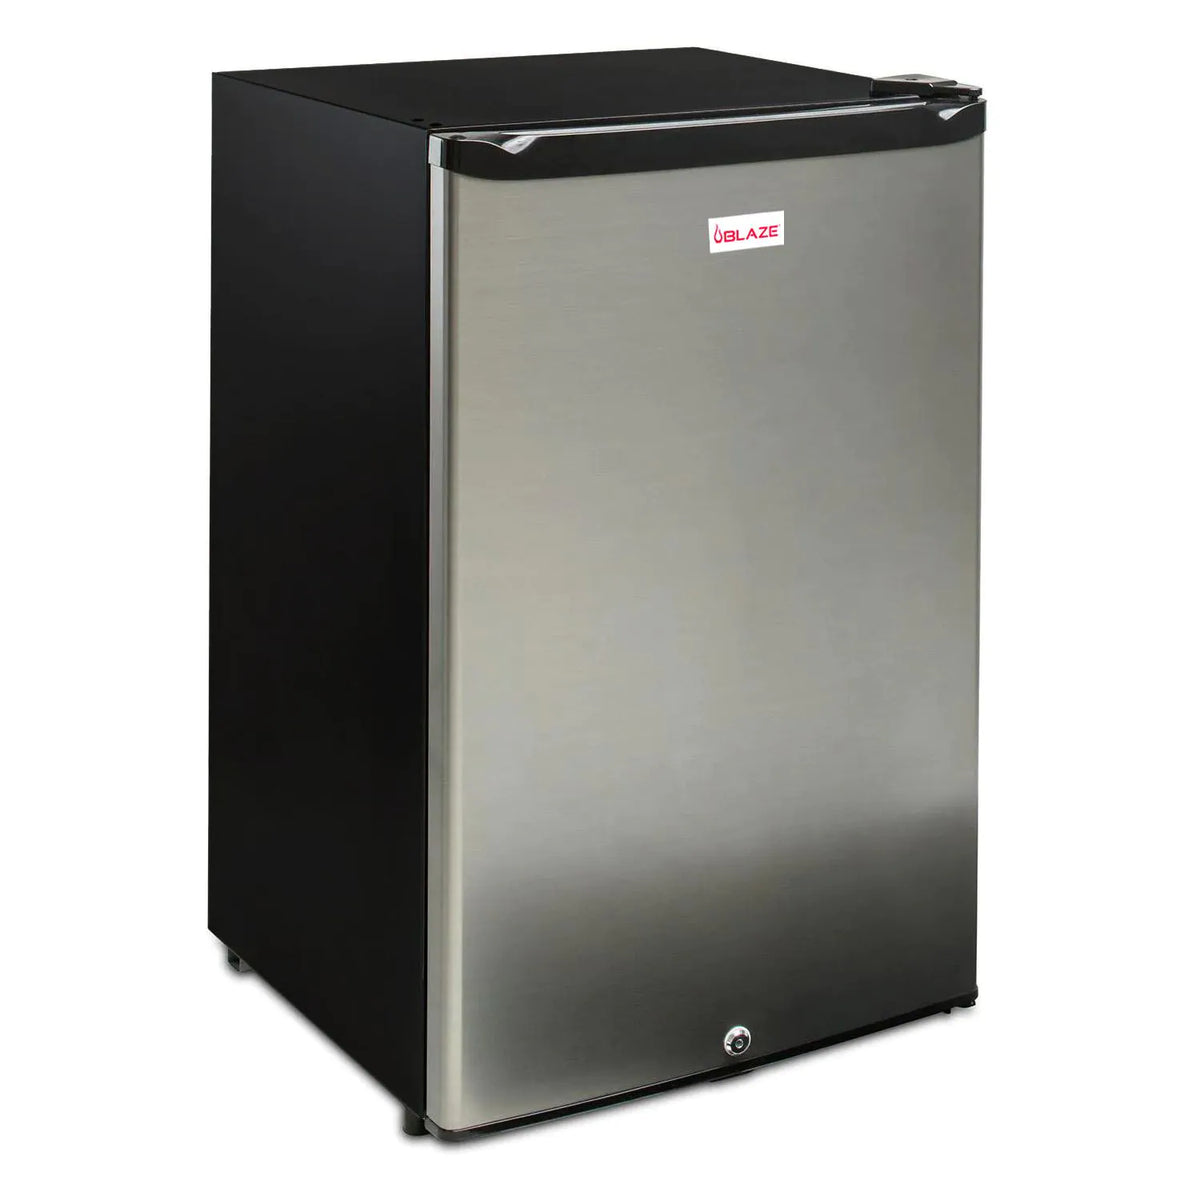 Blaze 20 Inch Outdoor Compact Refrigerator Left Angle View